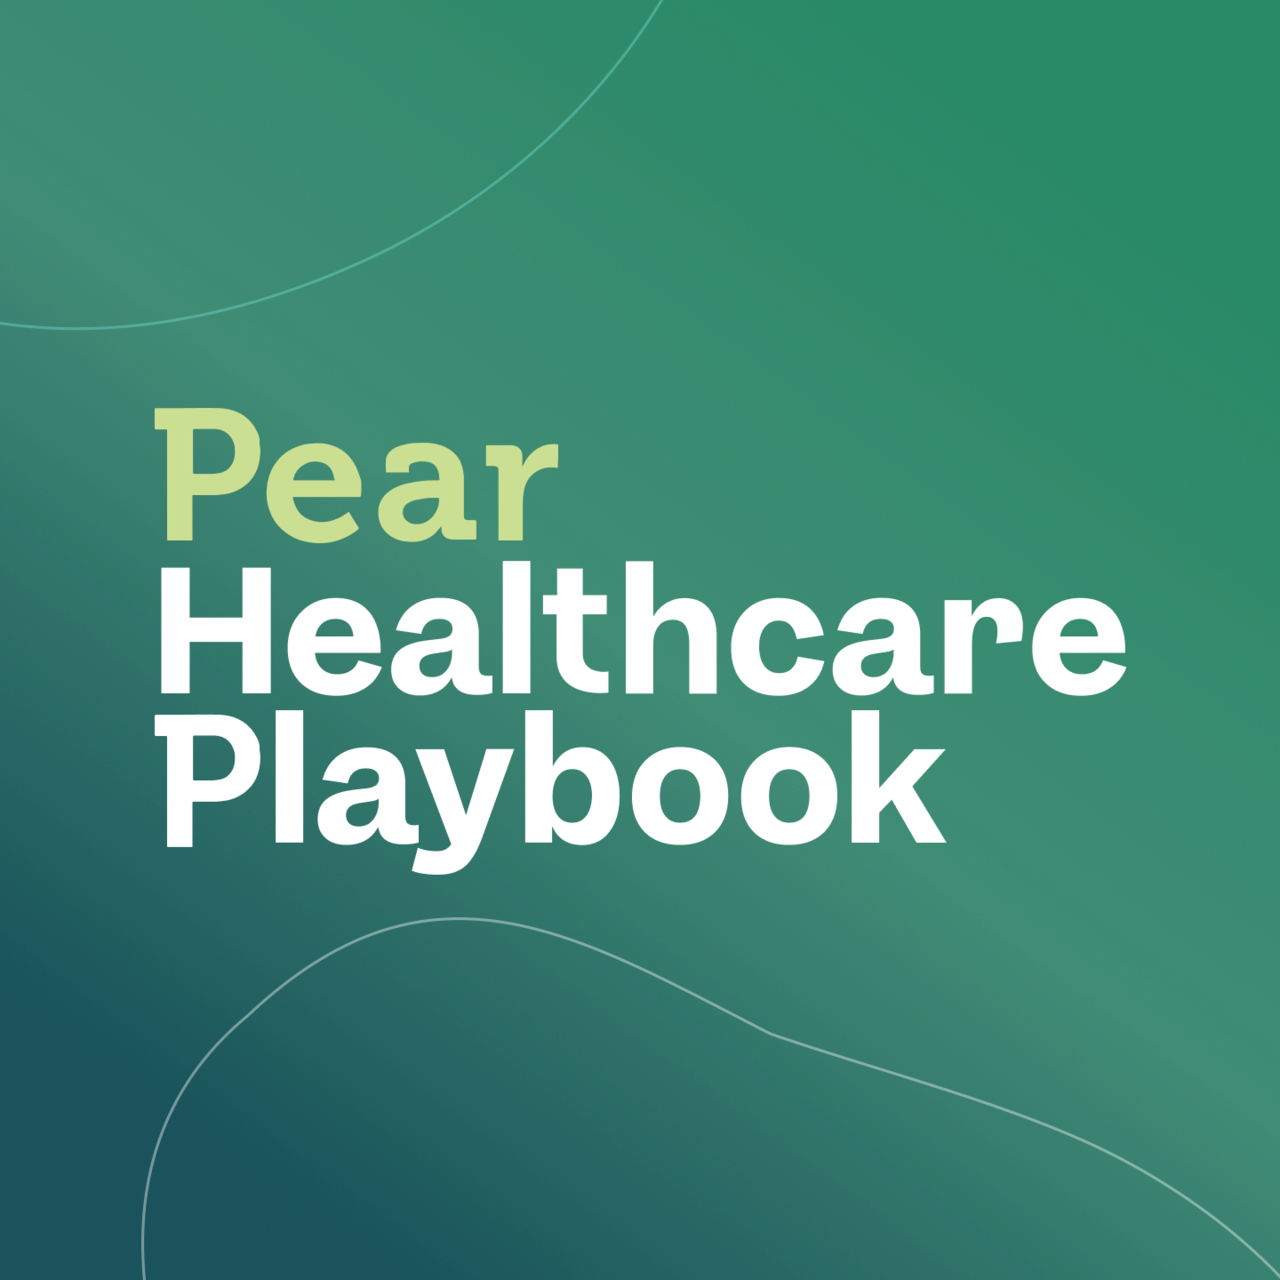 Artwork for Pear Healthcare Playbook